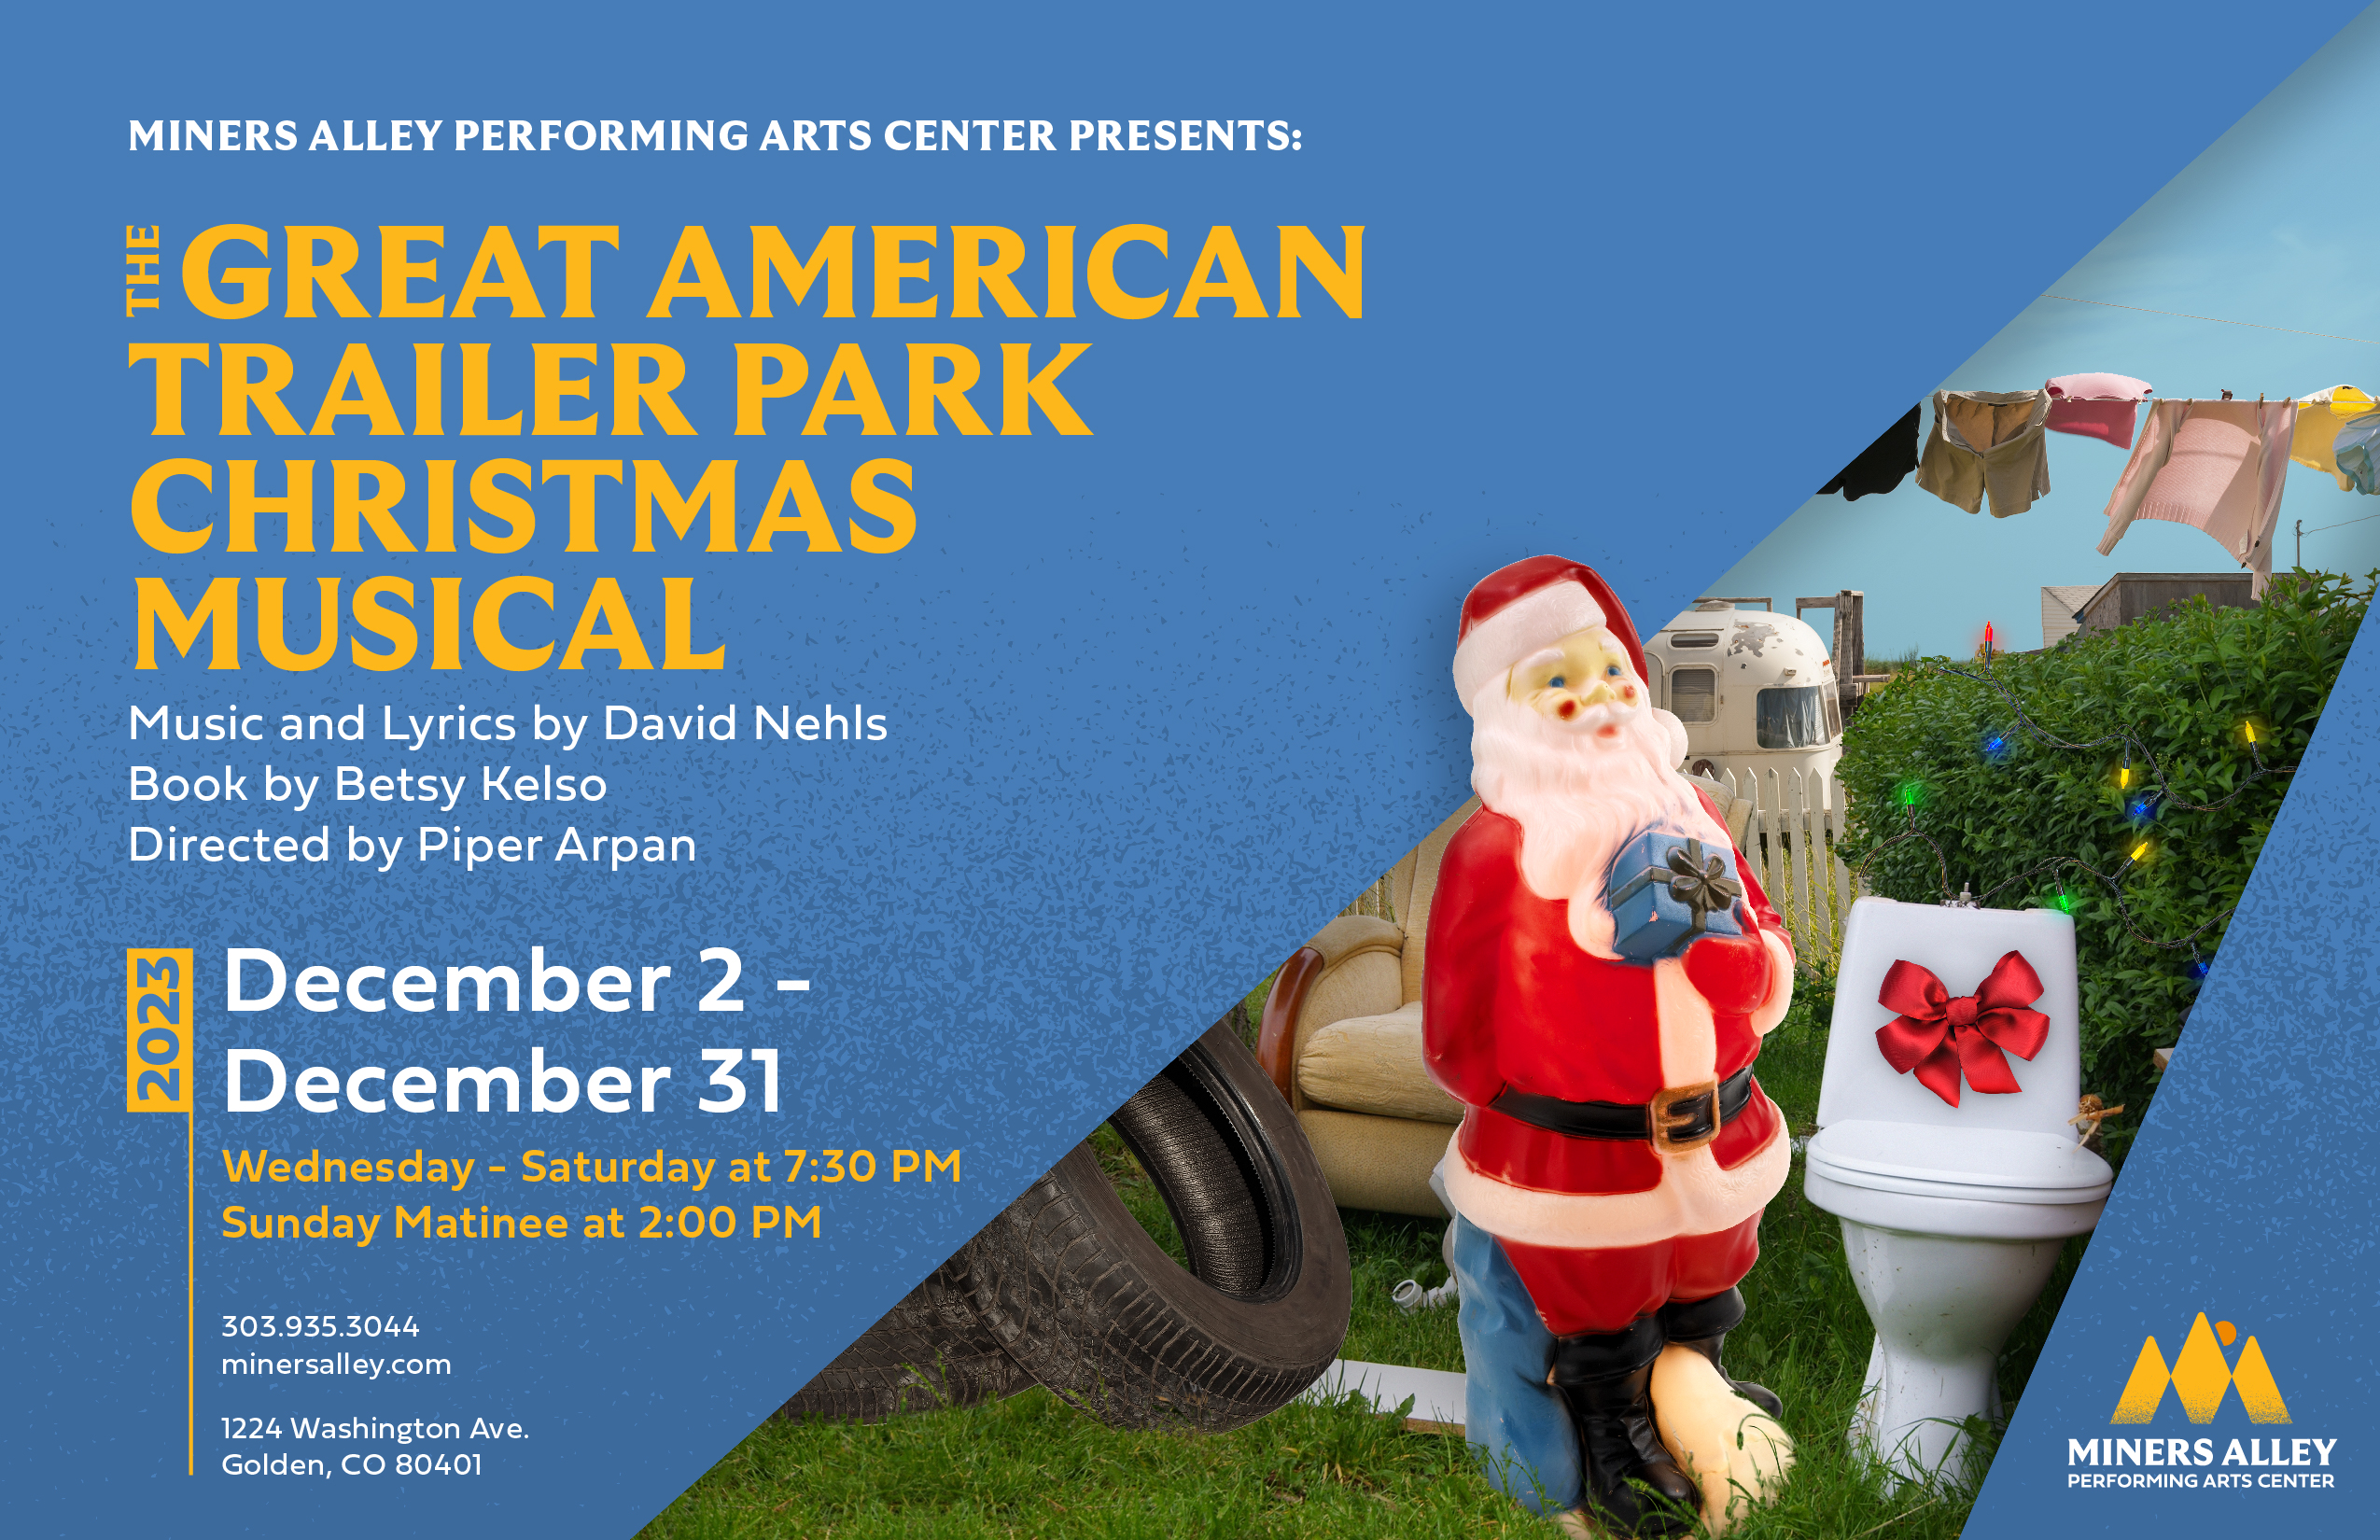 Santa, toilet, blue text, holiday-themed shows in Denver